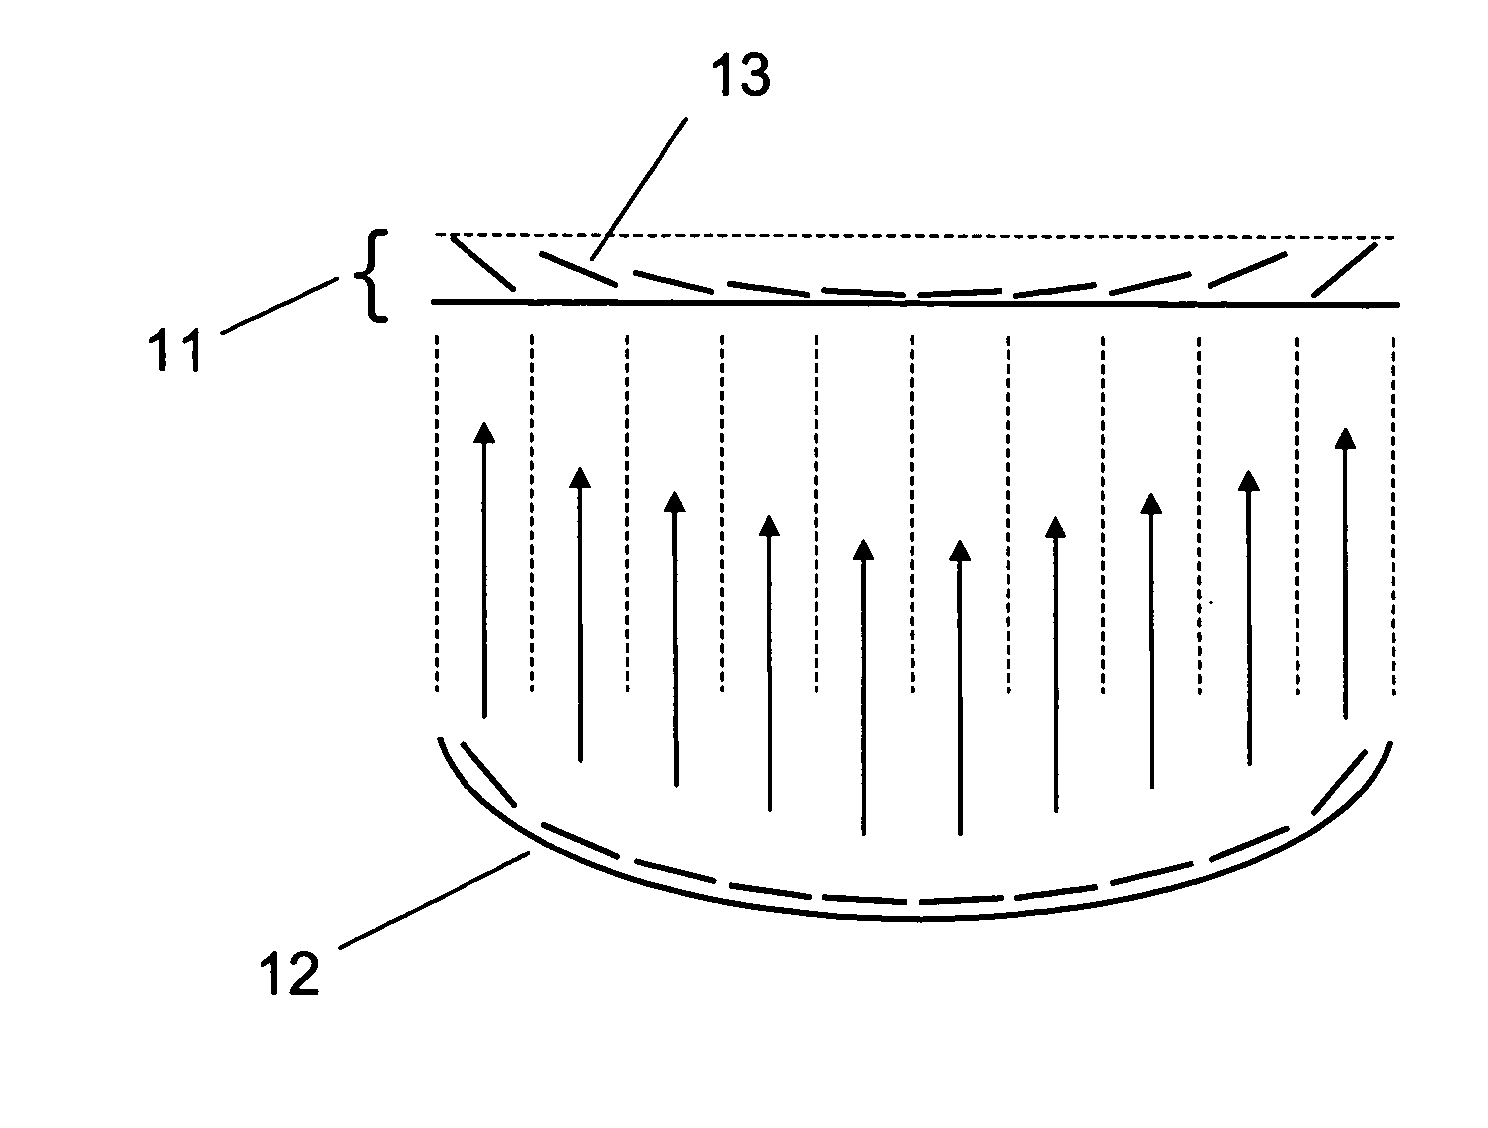 Variable focusing lens comprising micromirrors with one degree of freedom rotation